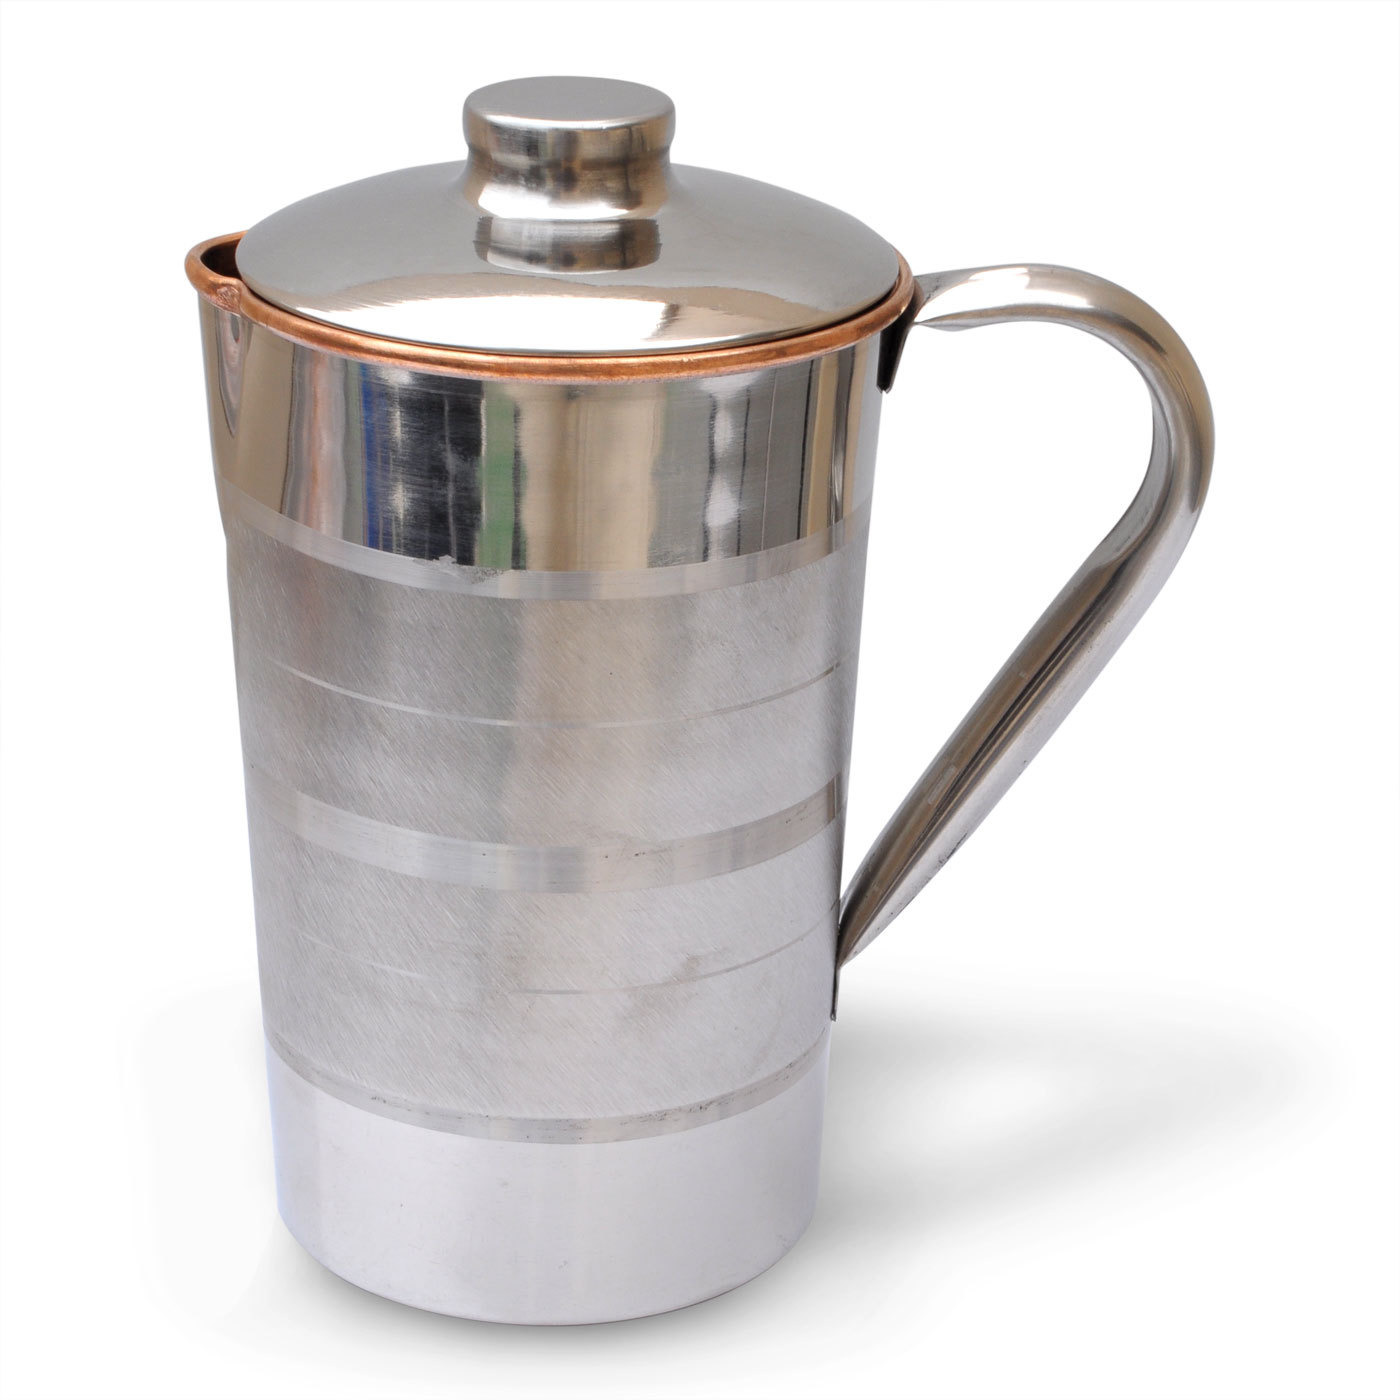 Prisha India Craft B. Copper Jug Water Pitcher Outside Stainless Steel Utensils for Ayurveda Healing Capacity 1.6 L